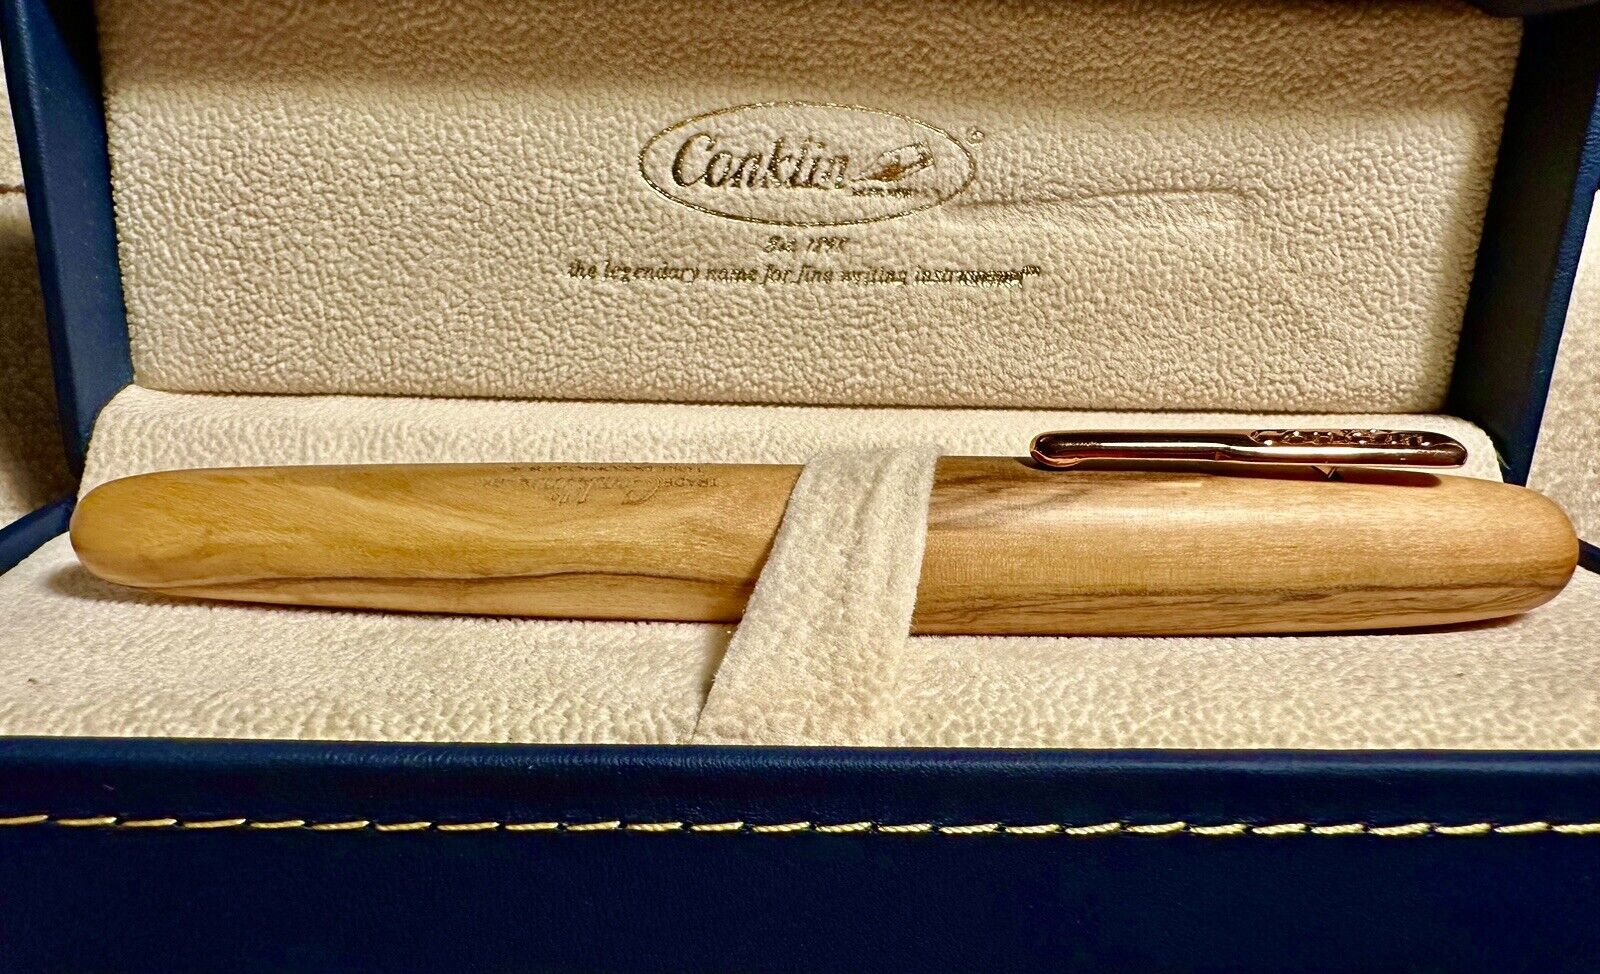 Conklin All American Olive Wood & Rosegold LE Fountain Pen - Med Nib